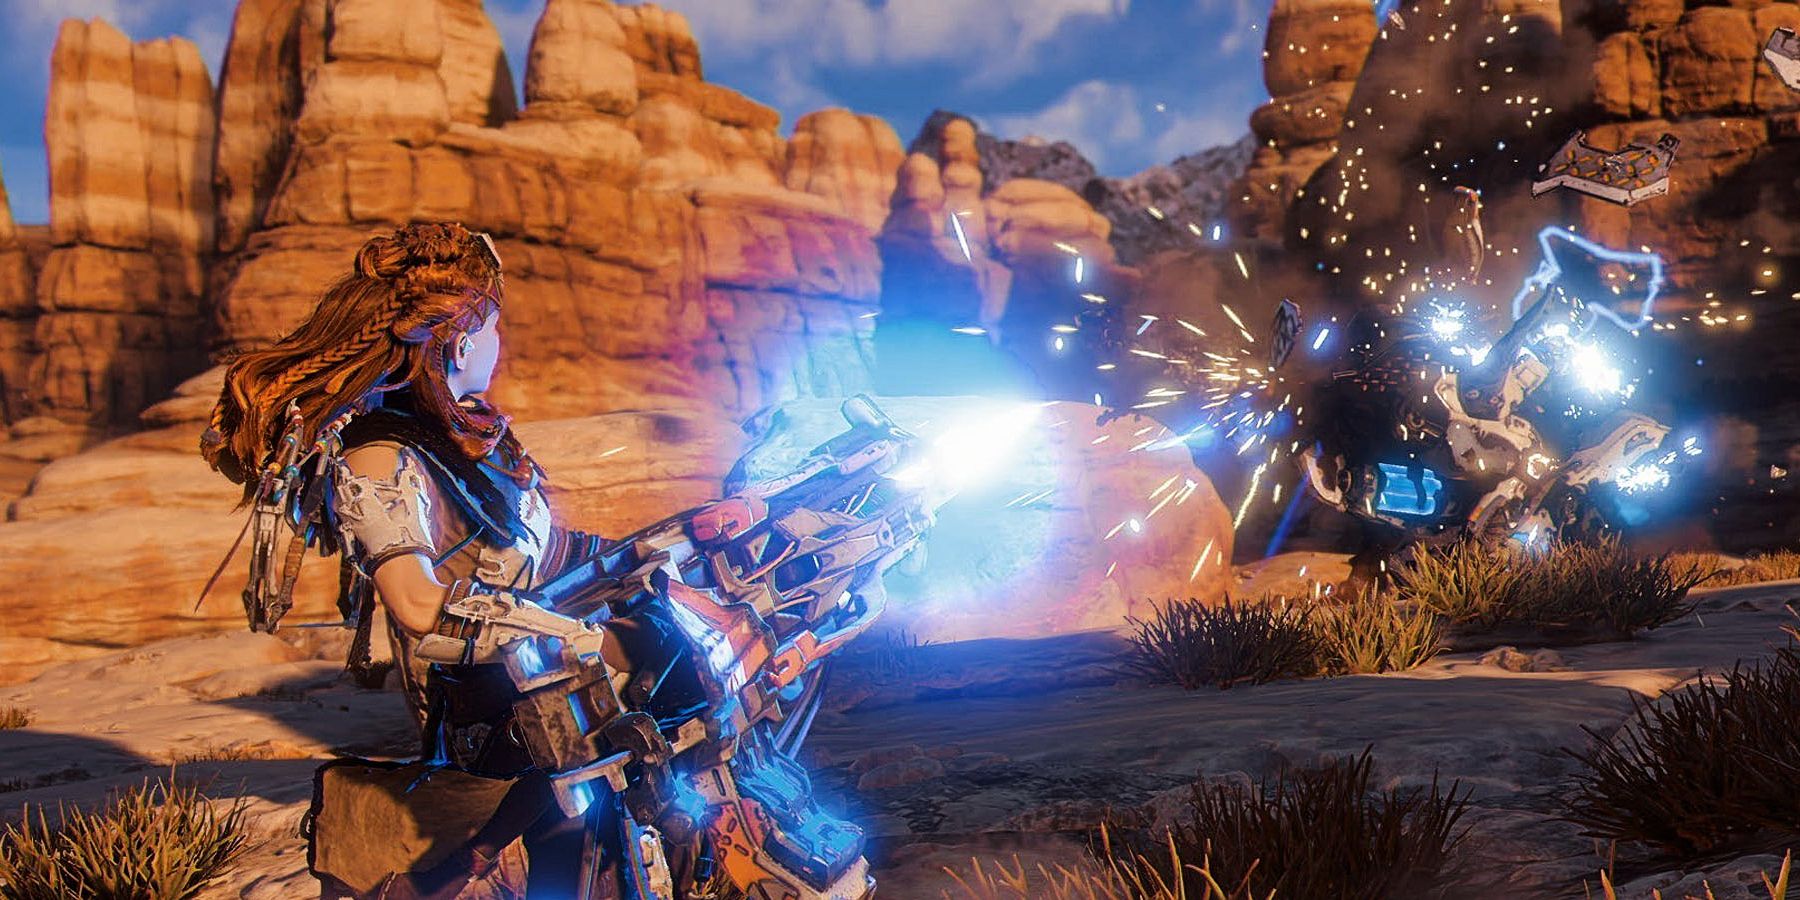 Aloy in Horizon Forbidden West battling an enemy while holding a large gun that shoots electric blasts